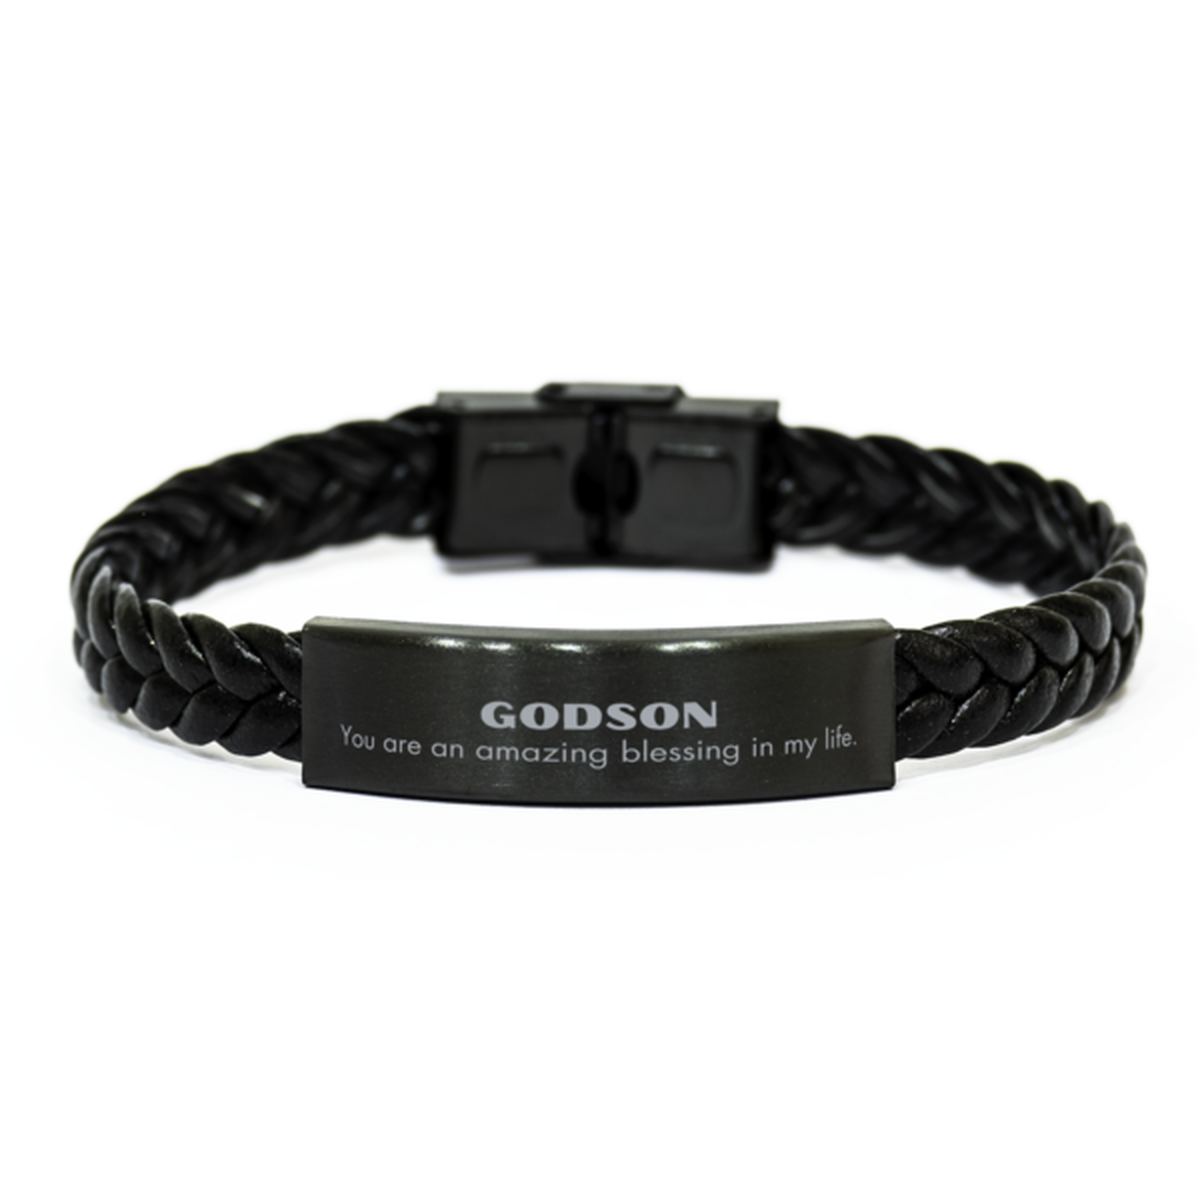 Godson Braided Leather Bracelet, You are an amazing blessing in my life, Thank You Gifts For Godson, Inspirational Birthday Christmas Unique Gifts For Godson